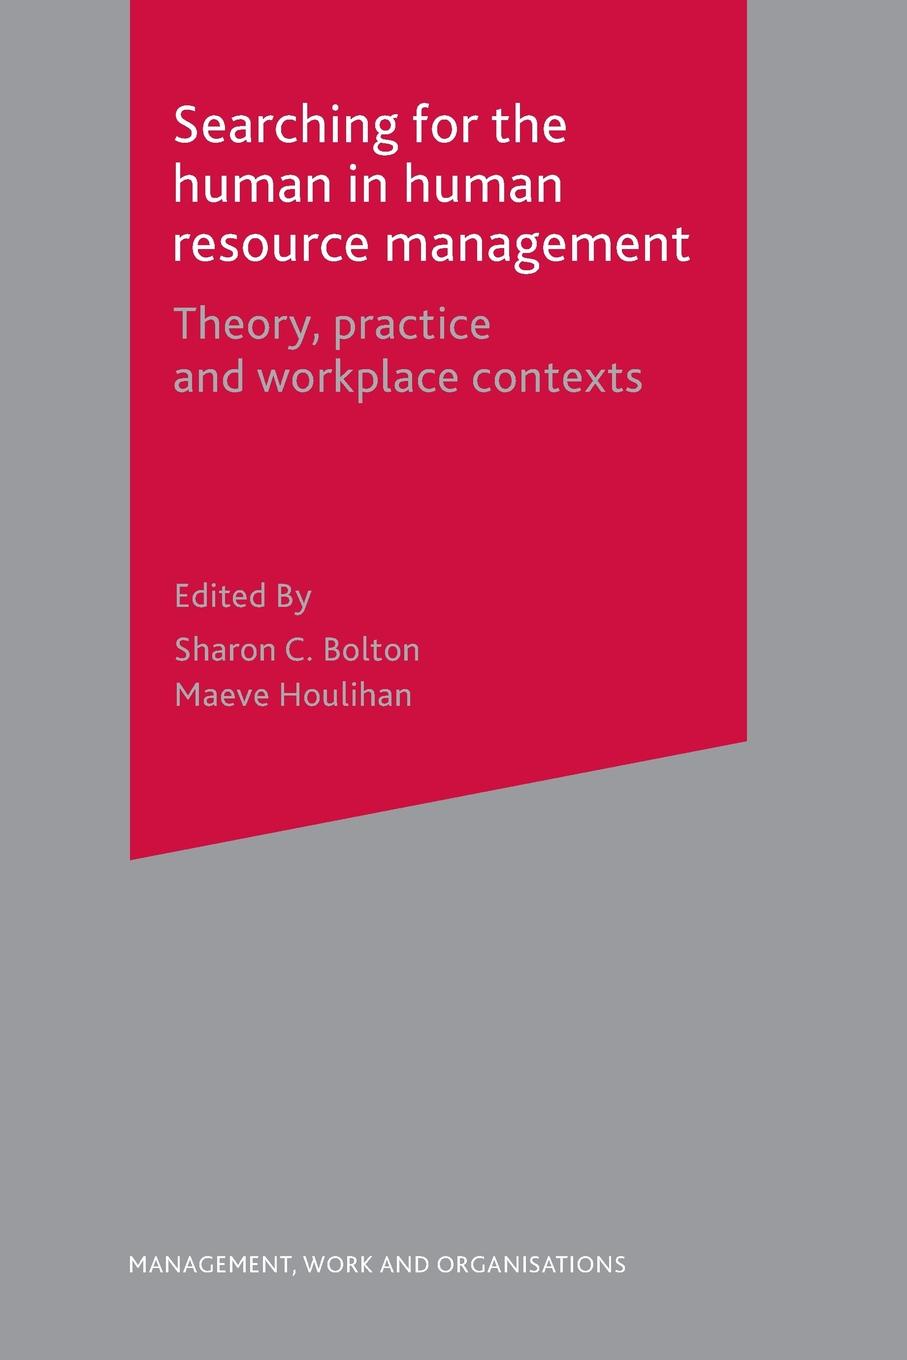 Searching for the Human in Human Resource Management. Theory, Practice and Workplace Contexts